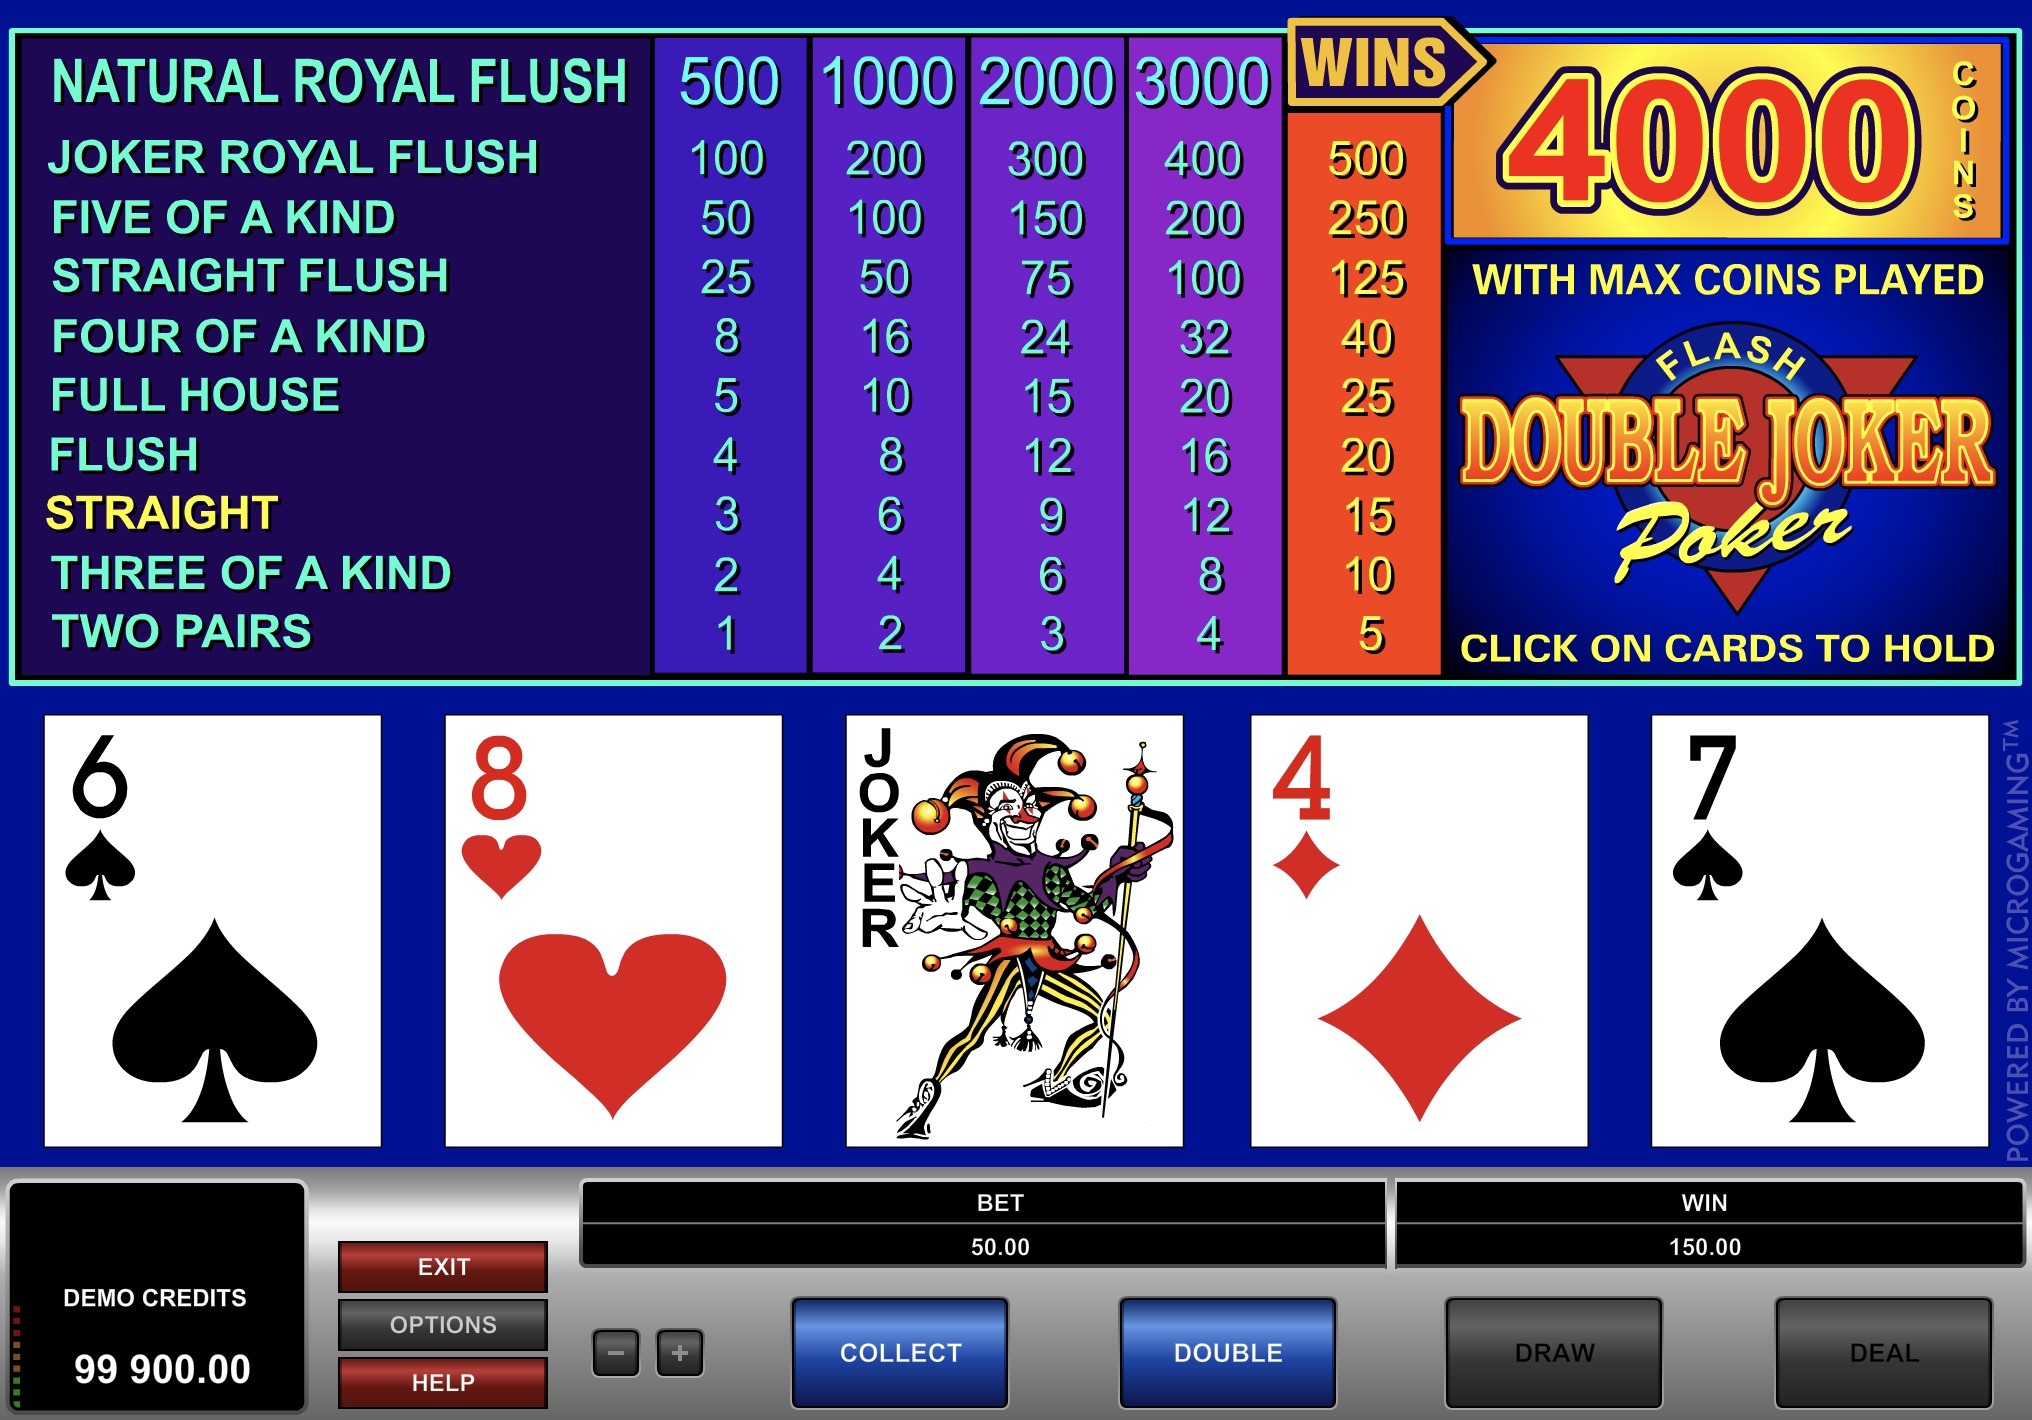 Play Joker poker mh Online Poker for Free.Try the online casino game totally free, No download, No Registration and No Deposit needed.